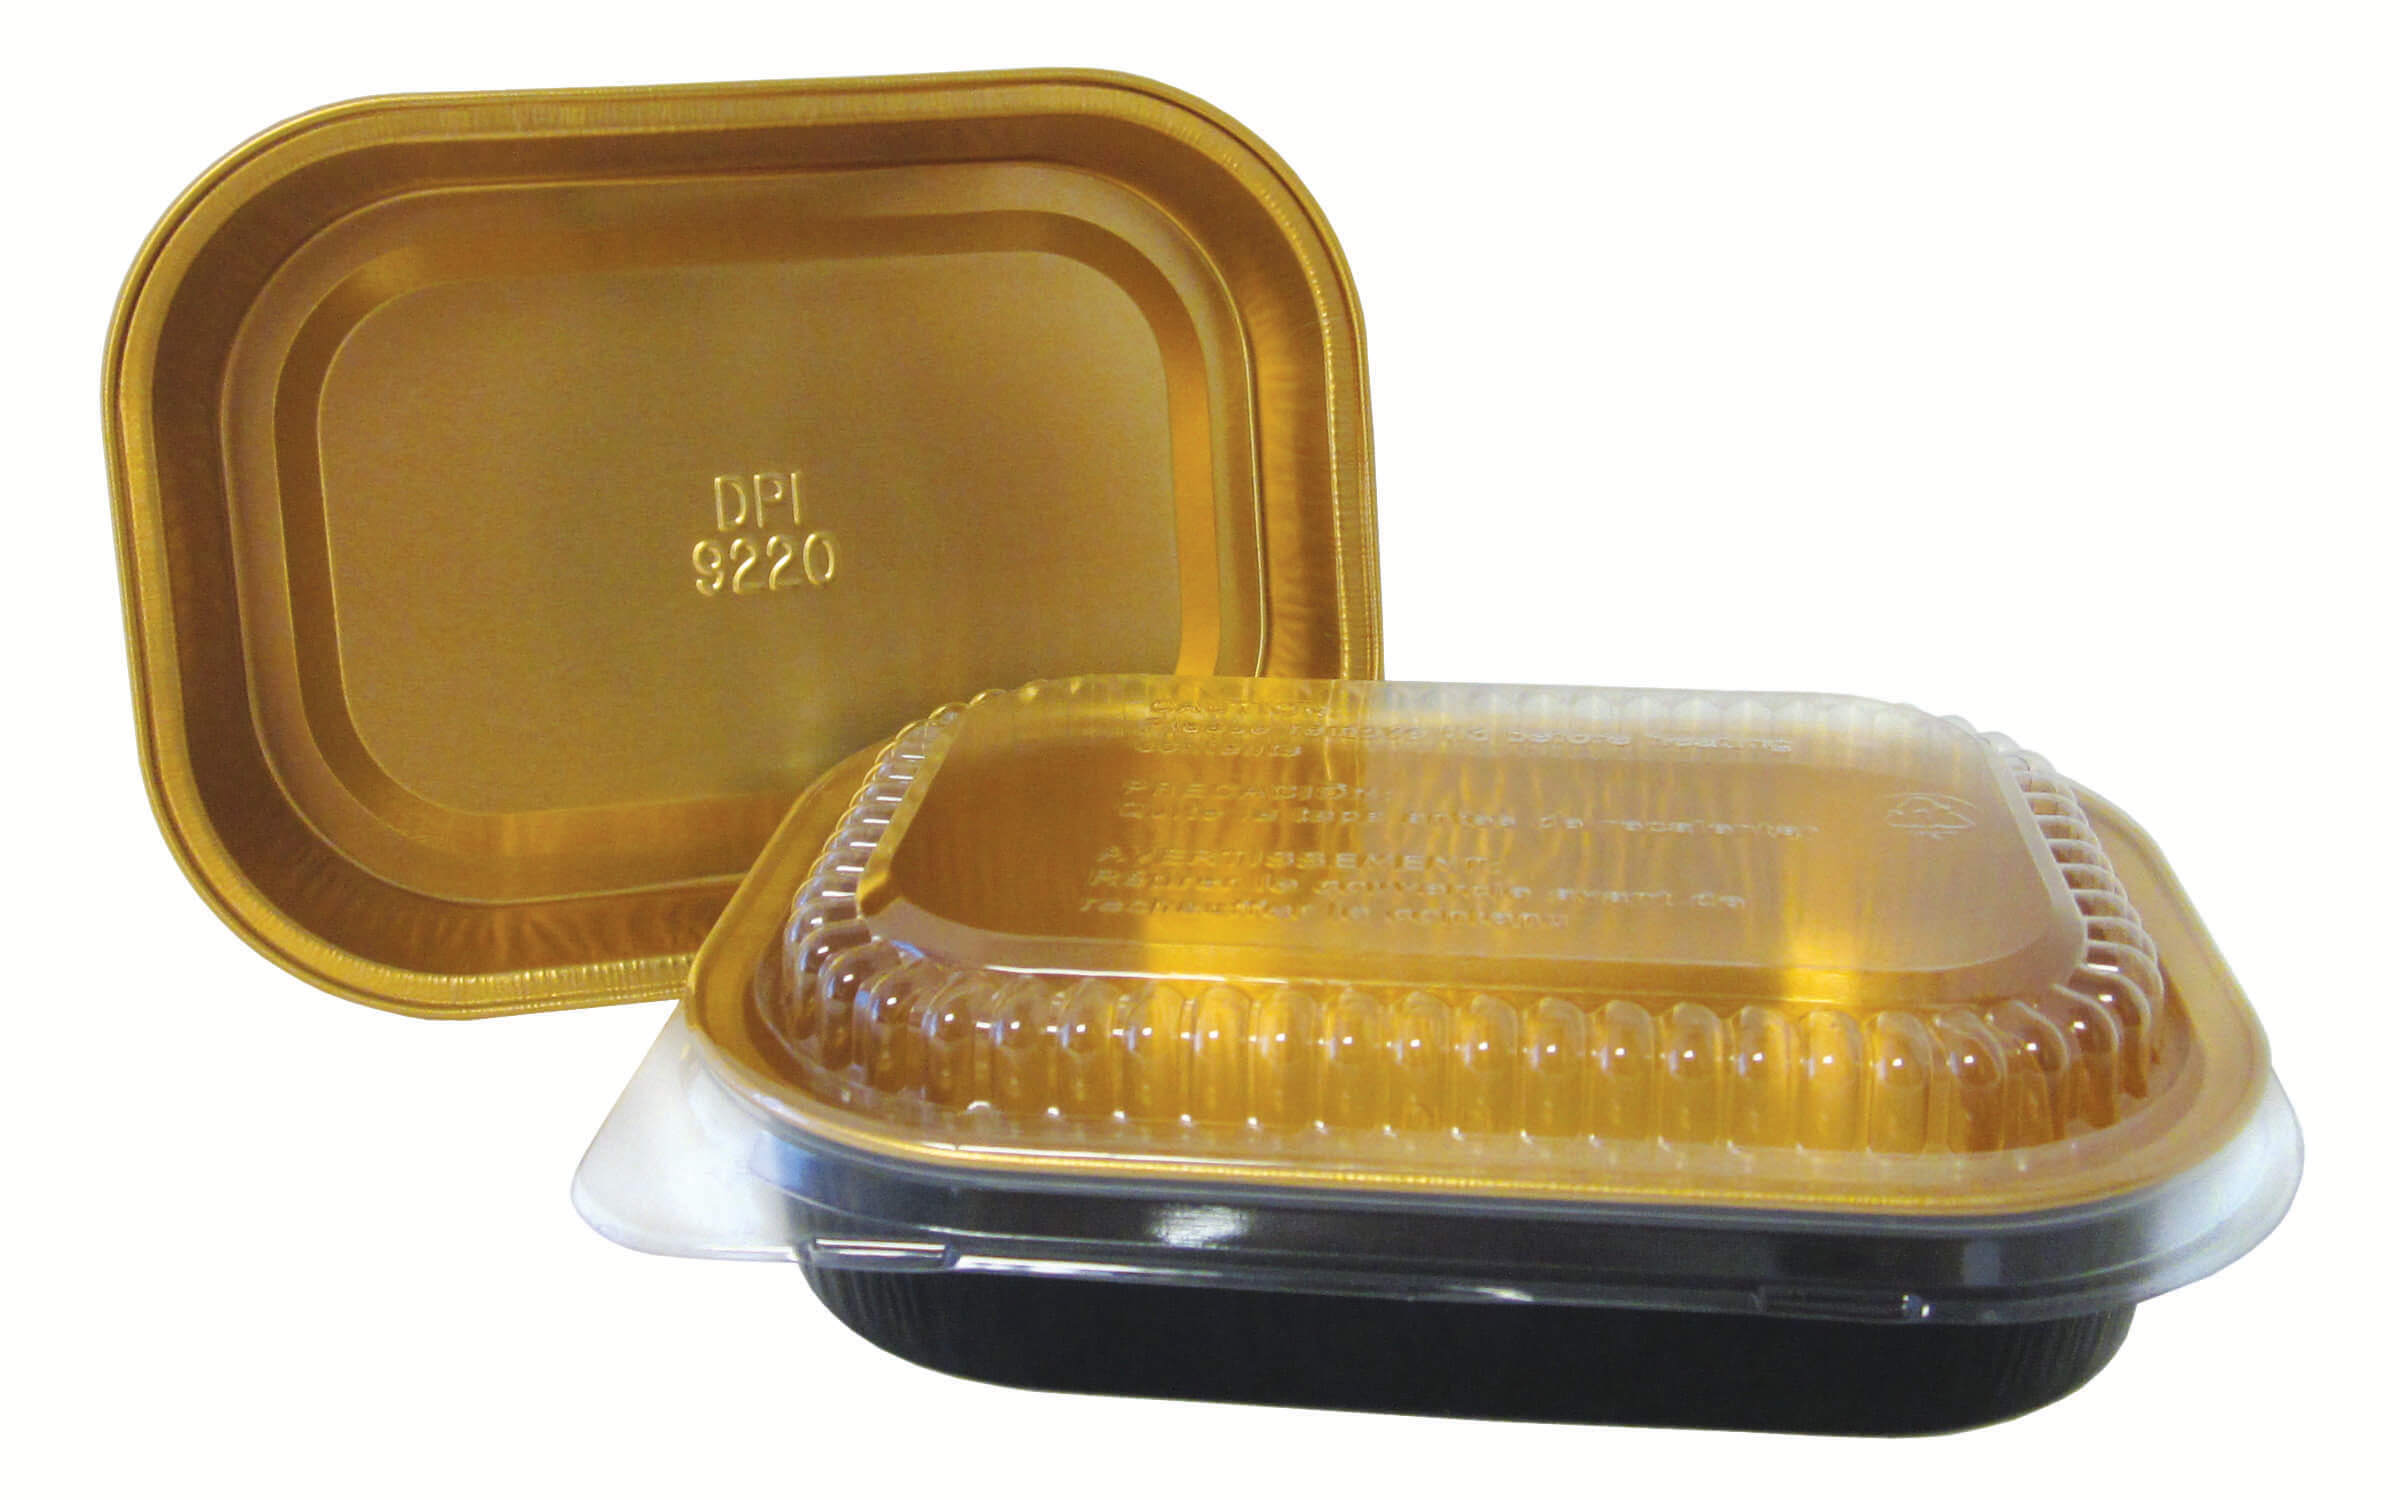 Pactiv Classic Carryout Aluminum Small Food Container Black/Gold, 46 fl-oz.  - 50/Case-SPLYCO